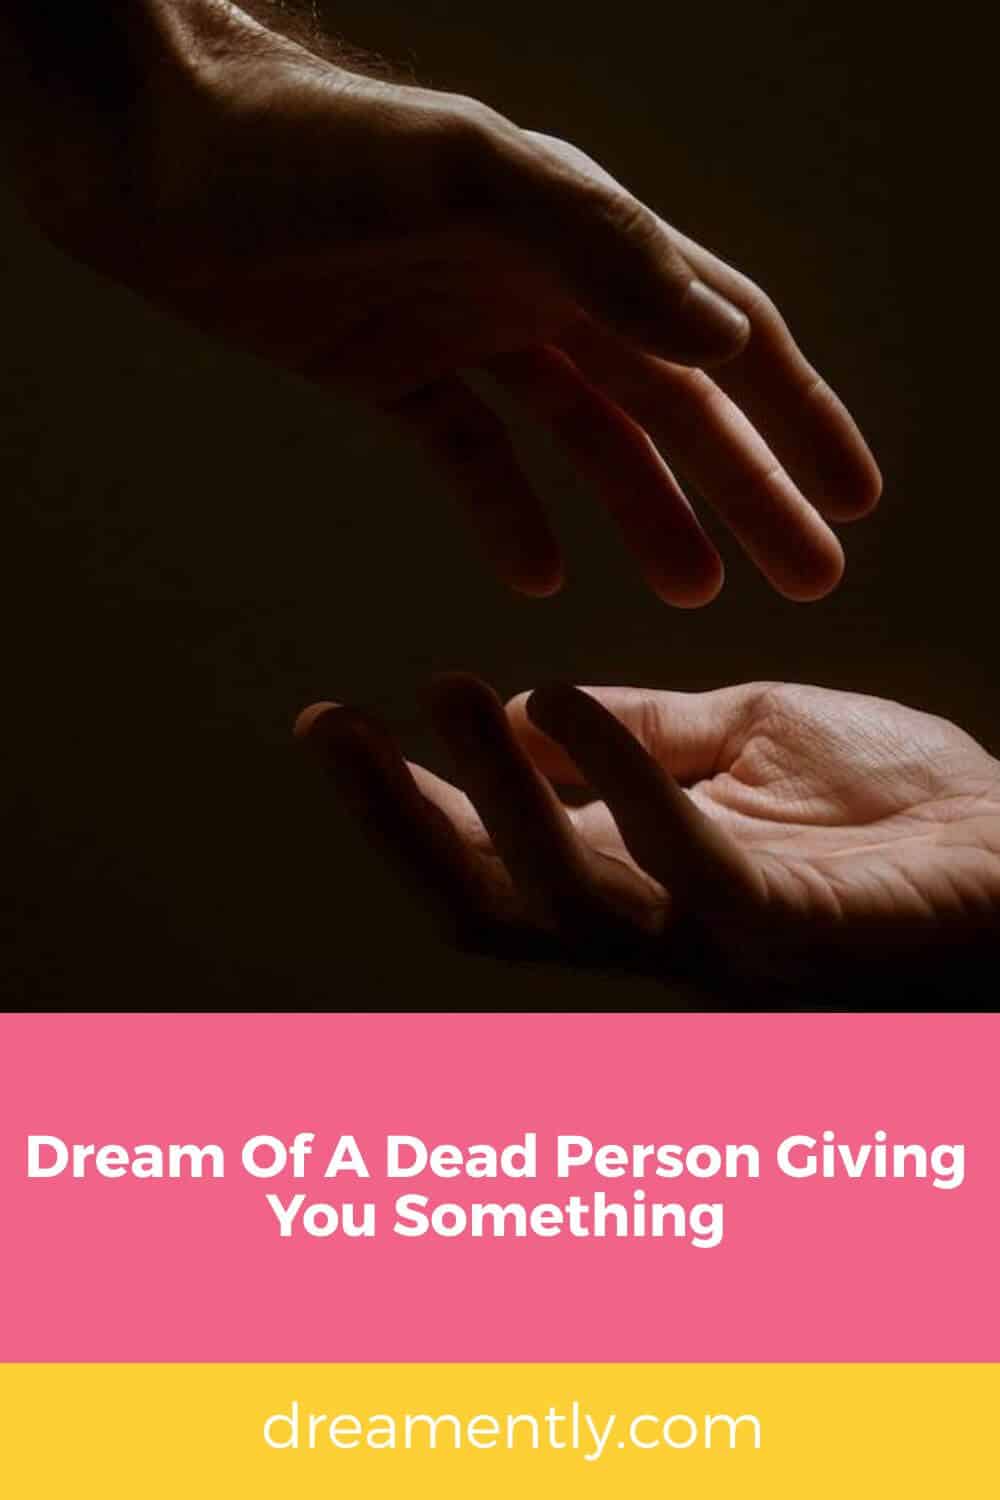 Dream Of A Dead Person Giving You Something (2)